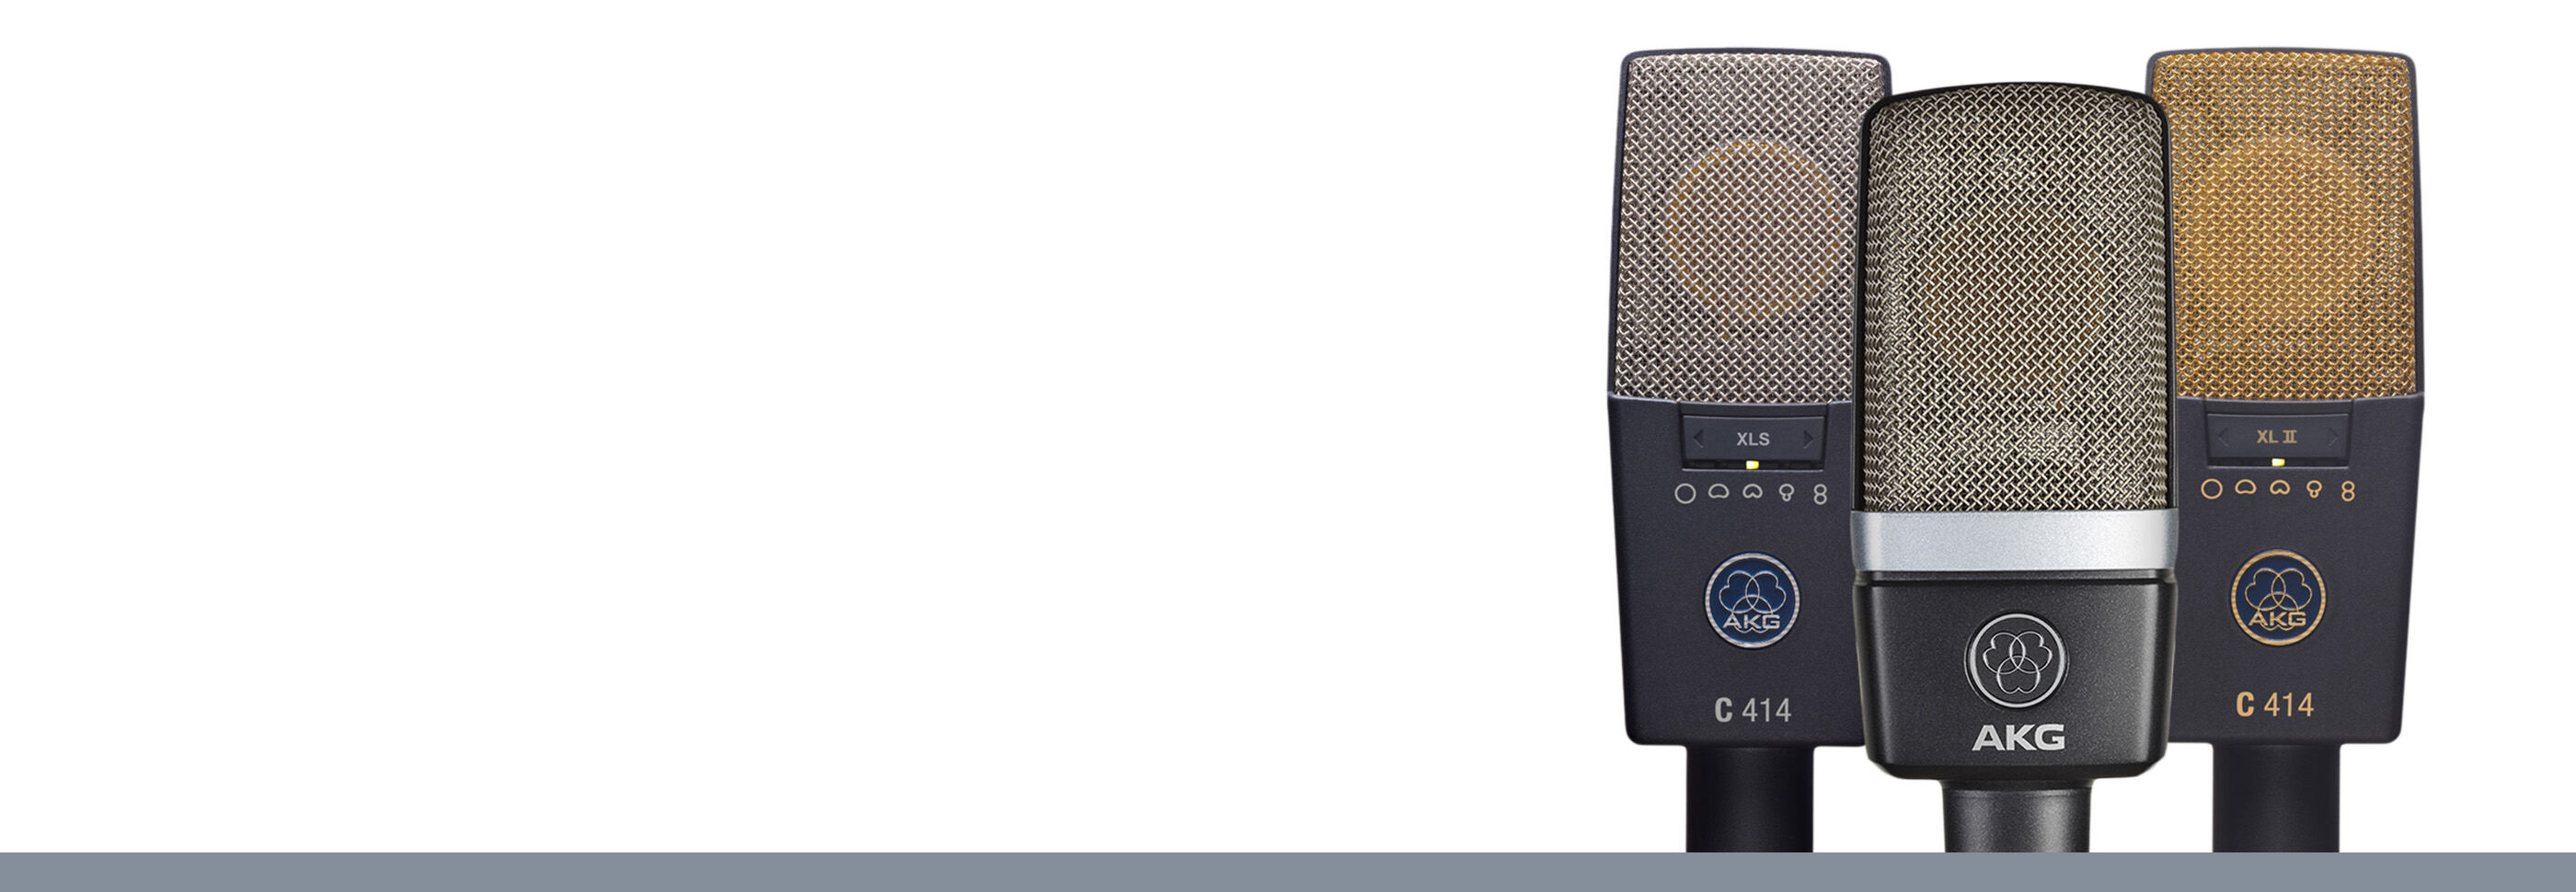 SAVE $180 - $471 ON SELECT PROFESSIONAL MICROPHONES